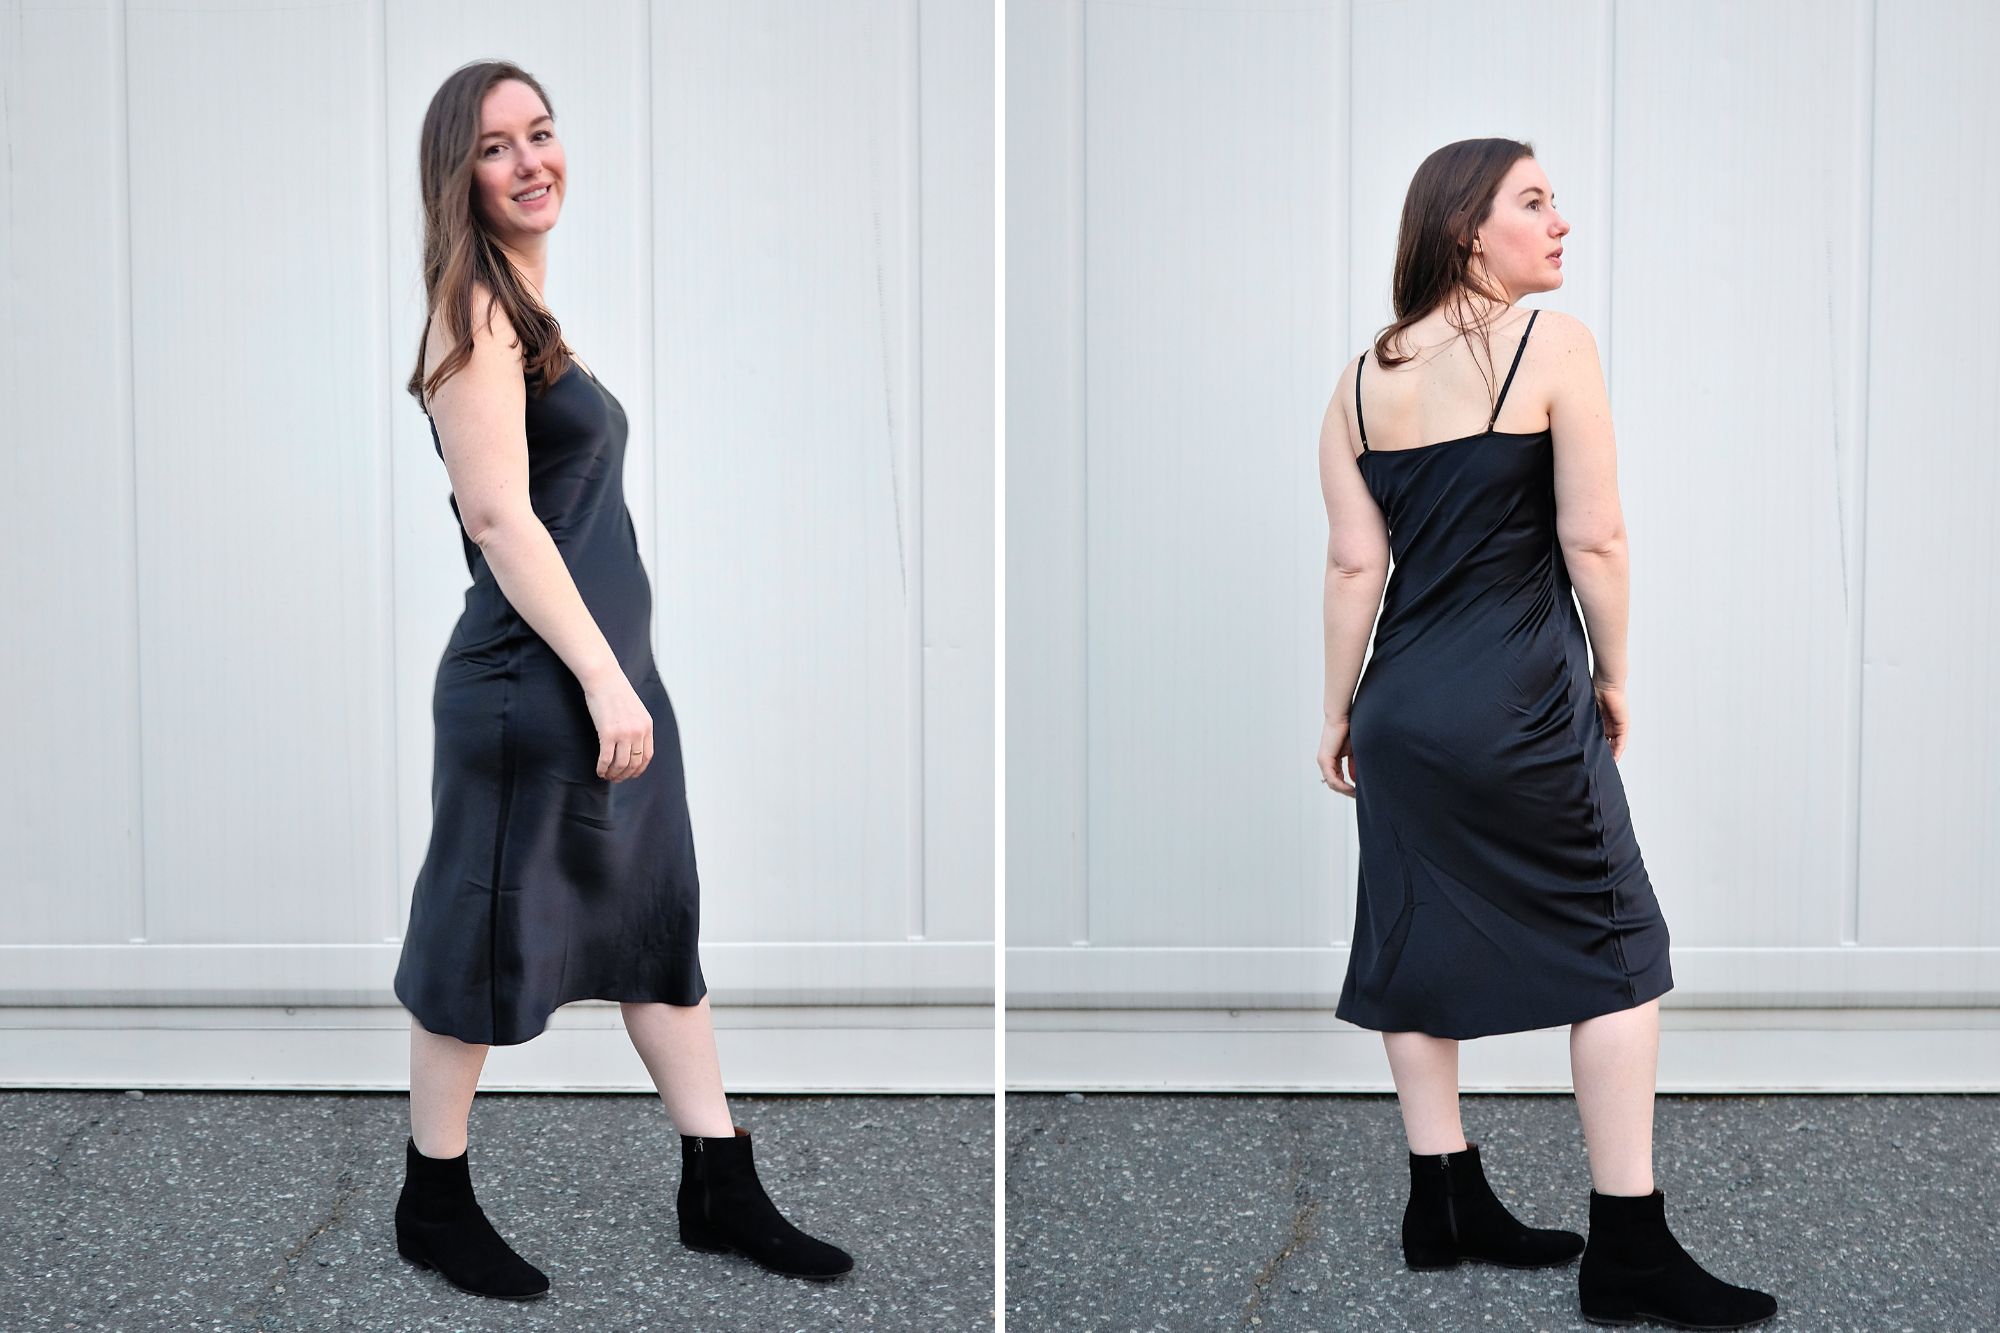 Alyssa wears the black slip dress from Quince in two photos